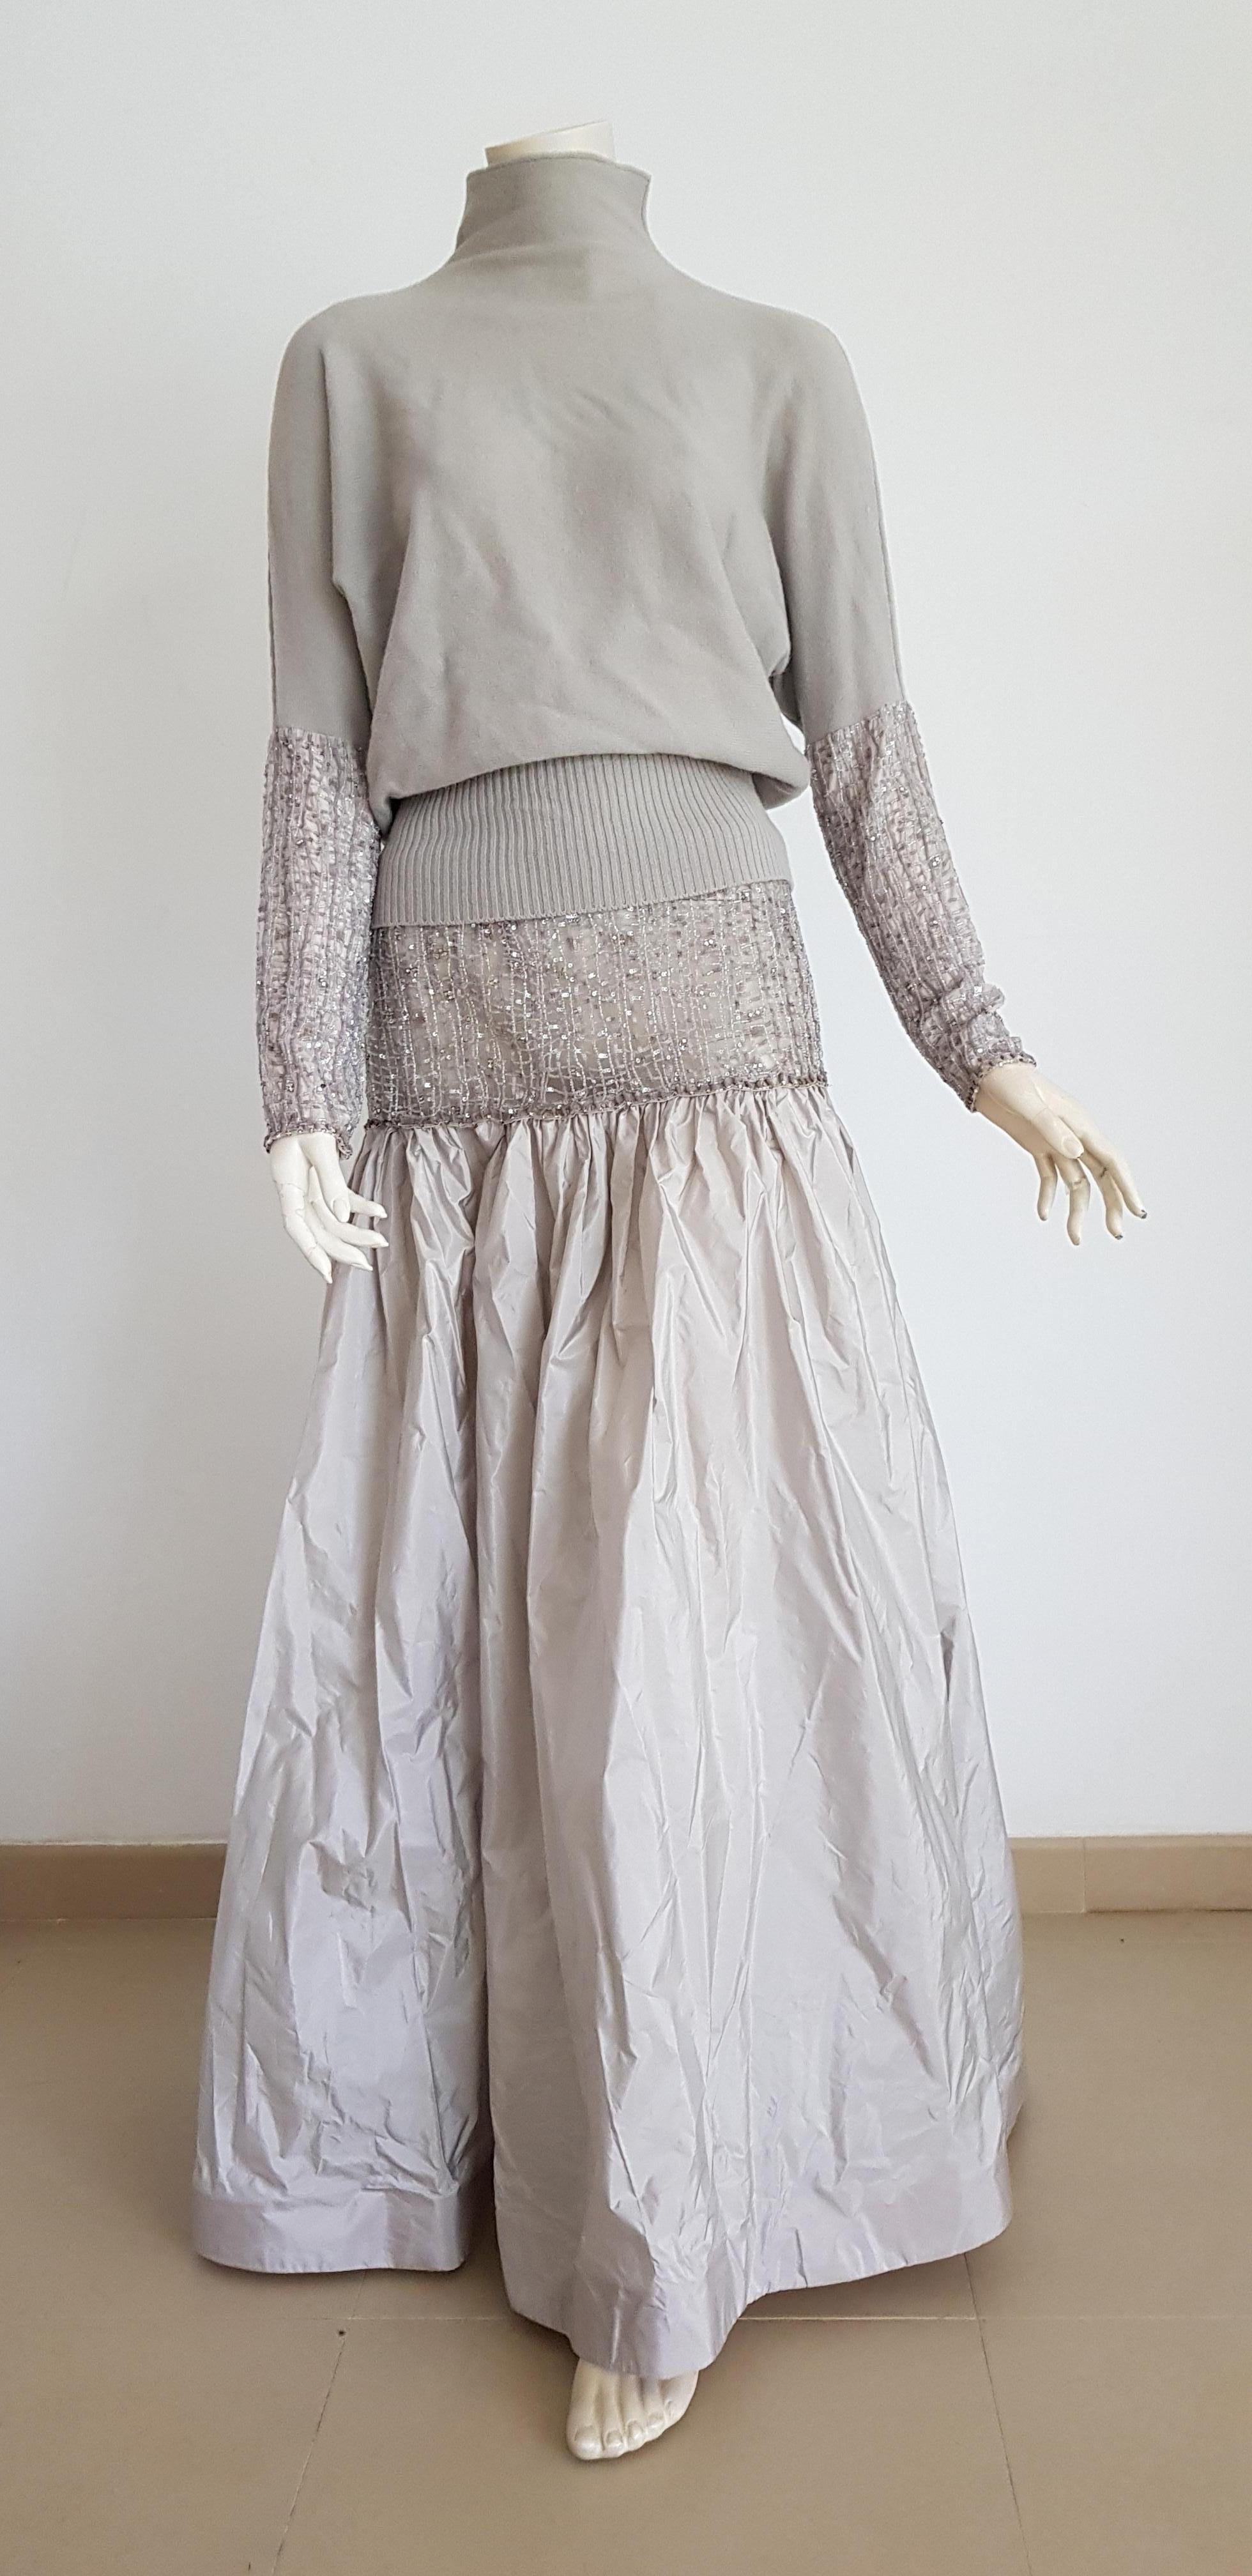 VALENTINO swarovsky diamonds set, top sweater and skirt with embroidery swarovski beads, in cashmere and silk, elegant grey dress - Unworn, New with tags.
..
SIZE: equivalent to about Small / Medium, please review approx measurements as follows in